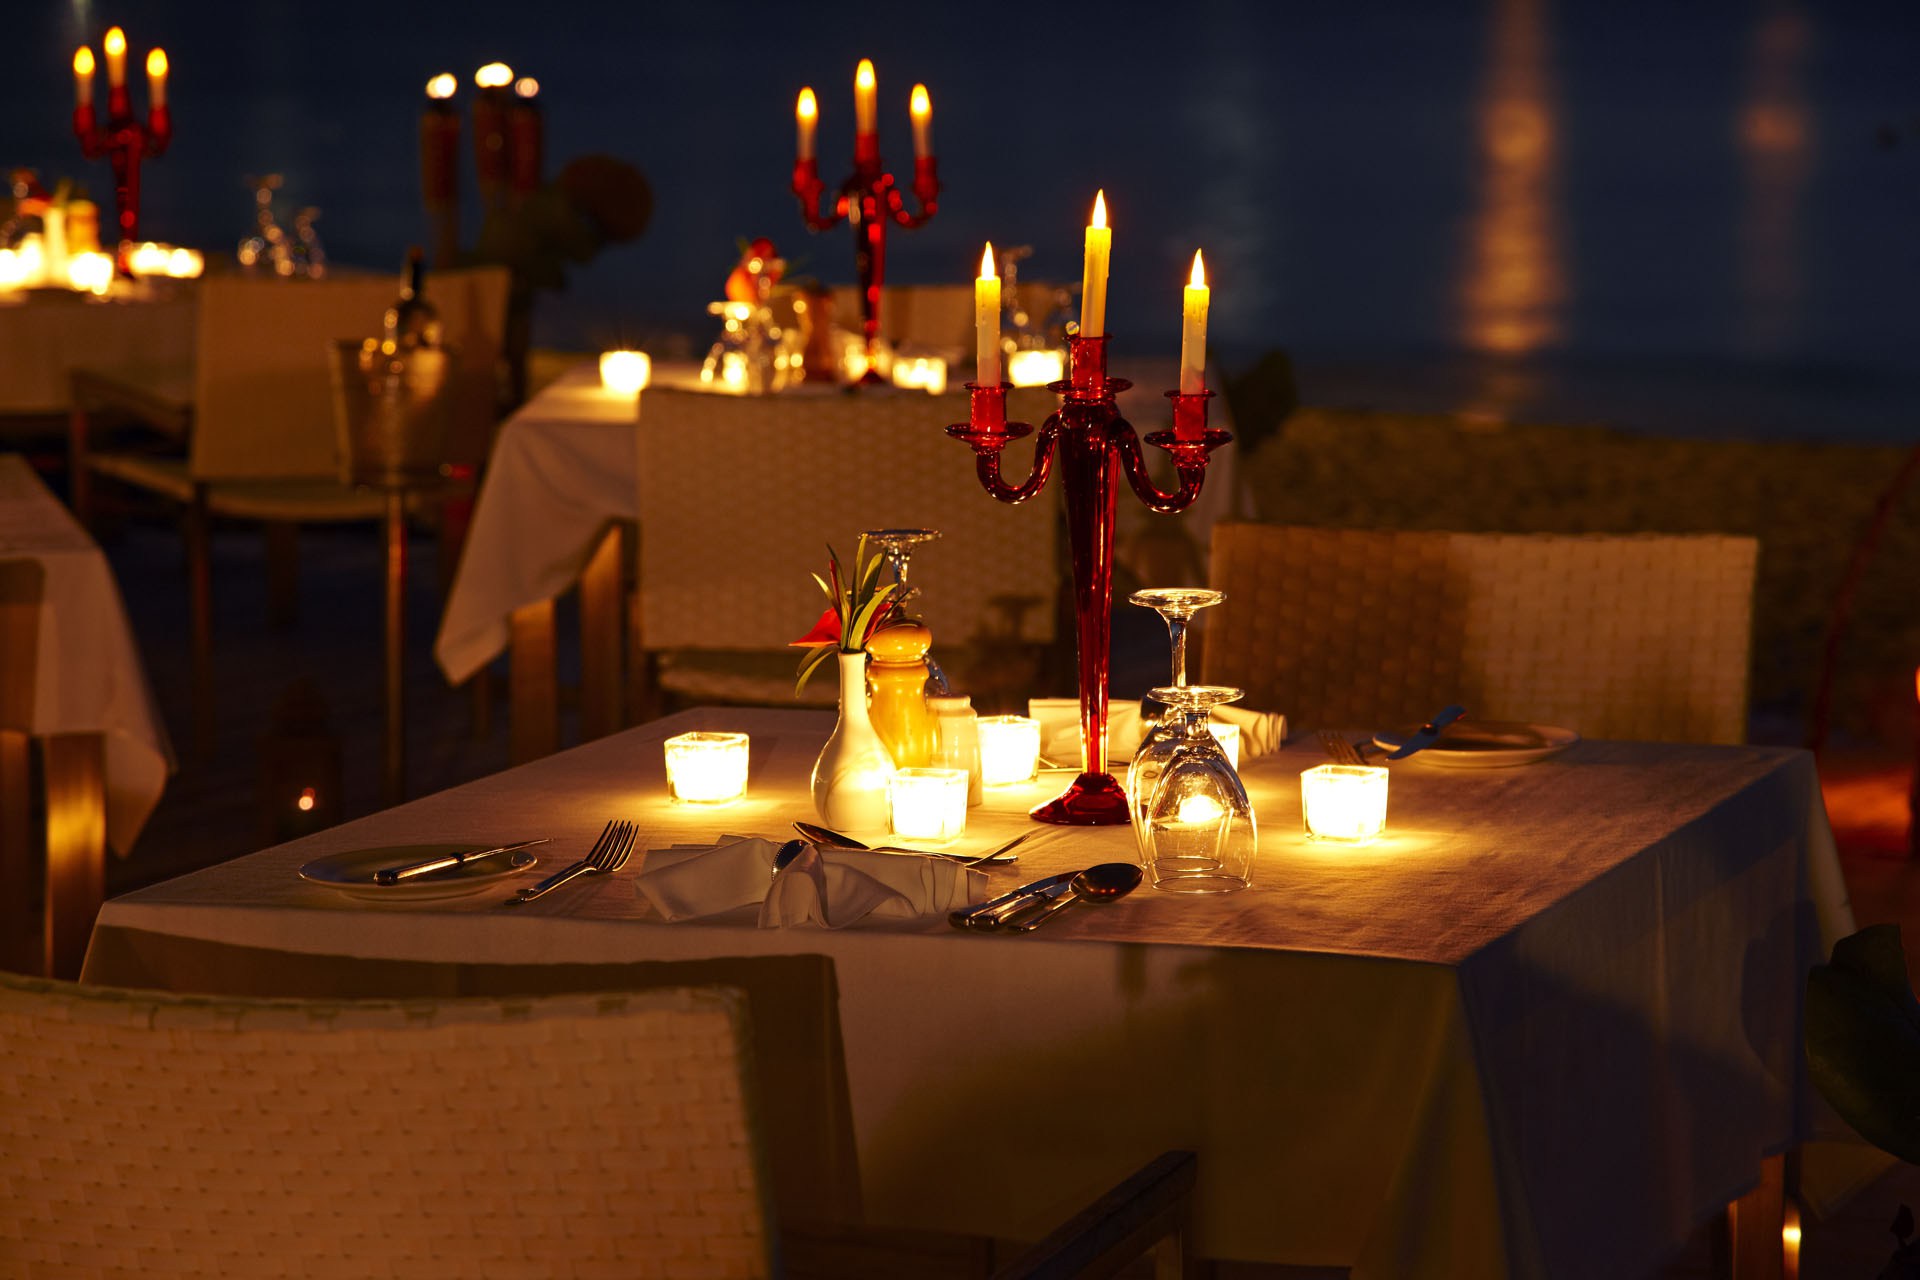 Are Dinner Date Bookings Worth the Cost?